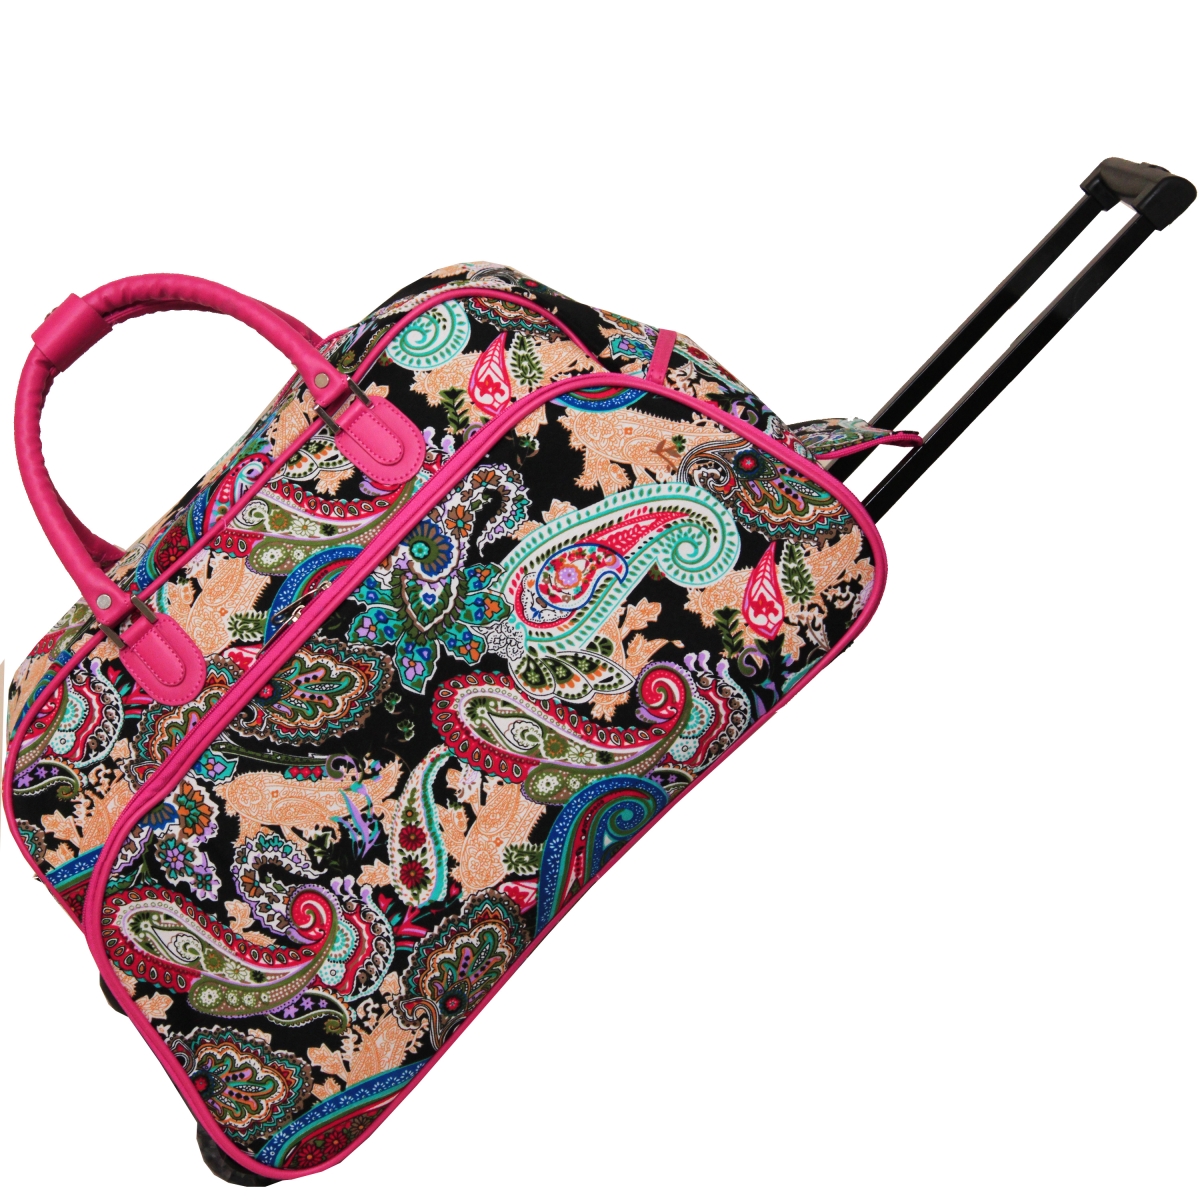 8112022-181-f 21 In. Carry On Rolling Duffel Bag - Pink Trim Multicolor Paisley